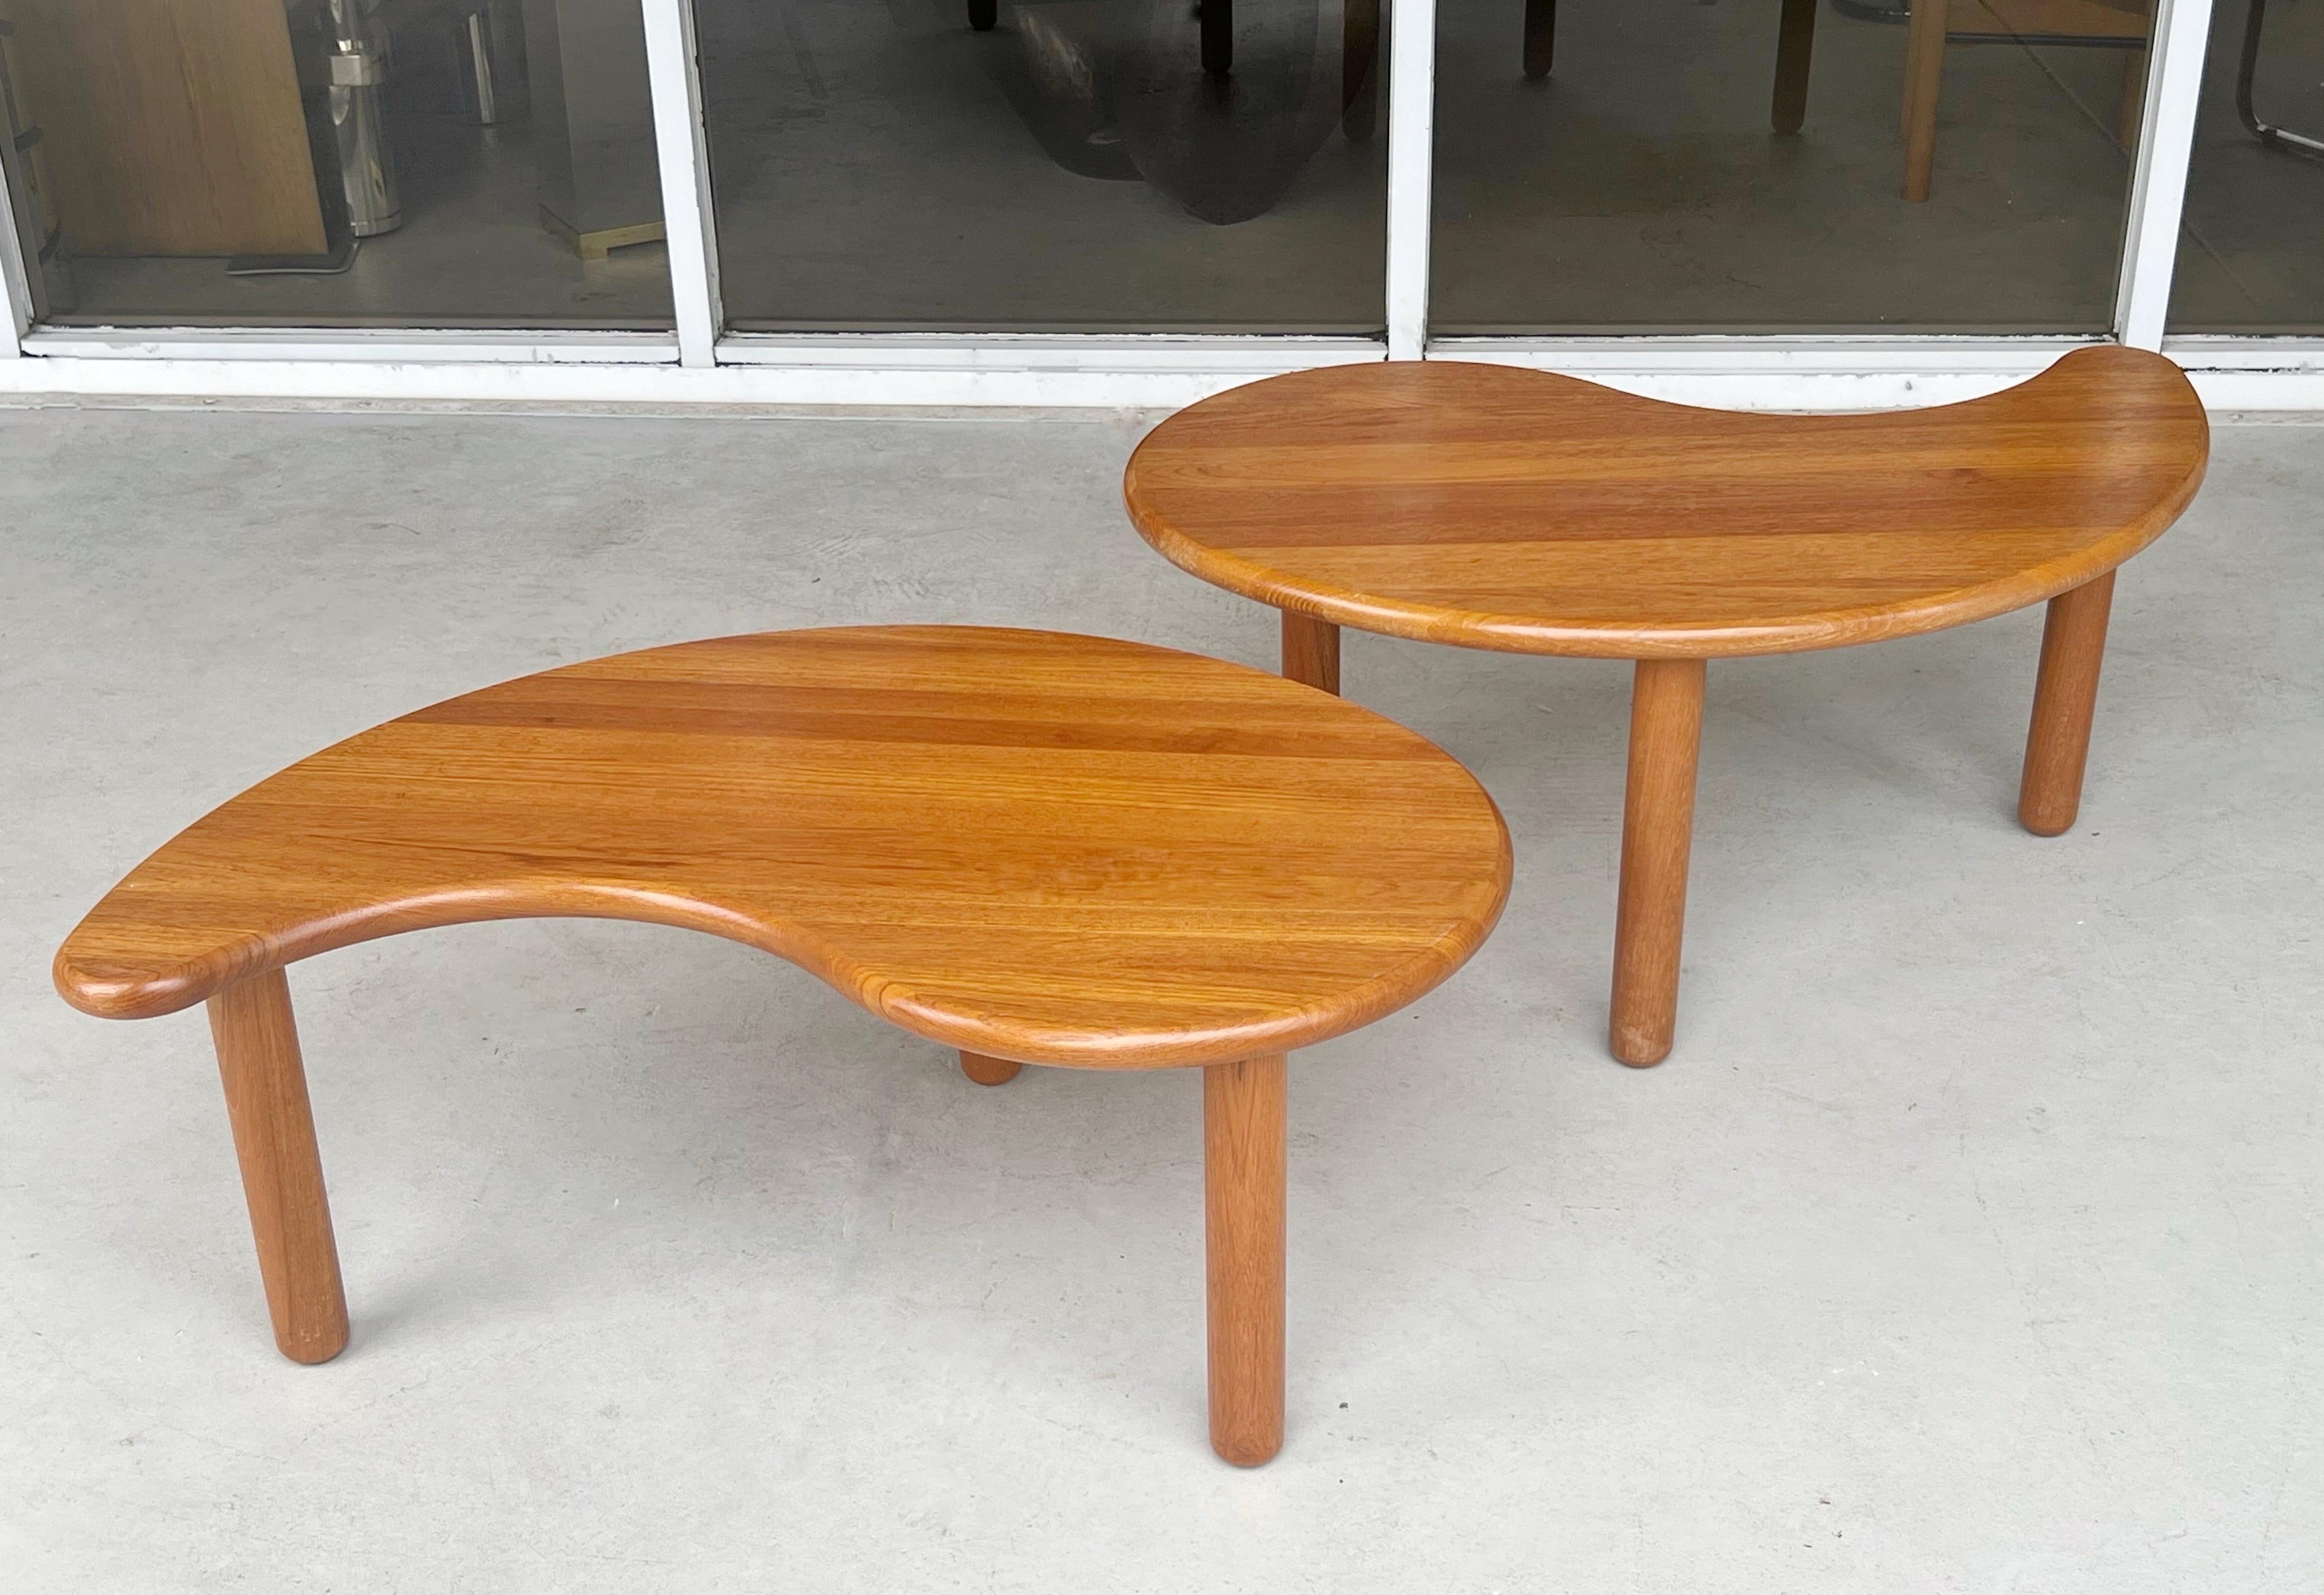 Unusual coffee table. its actually a two part in the Jing Jang design. One table is actually tall enough to allow the lower table to go under a little bit. Each with 3 solid cylindrical legs that screw to the top.